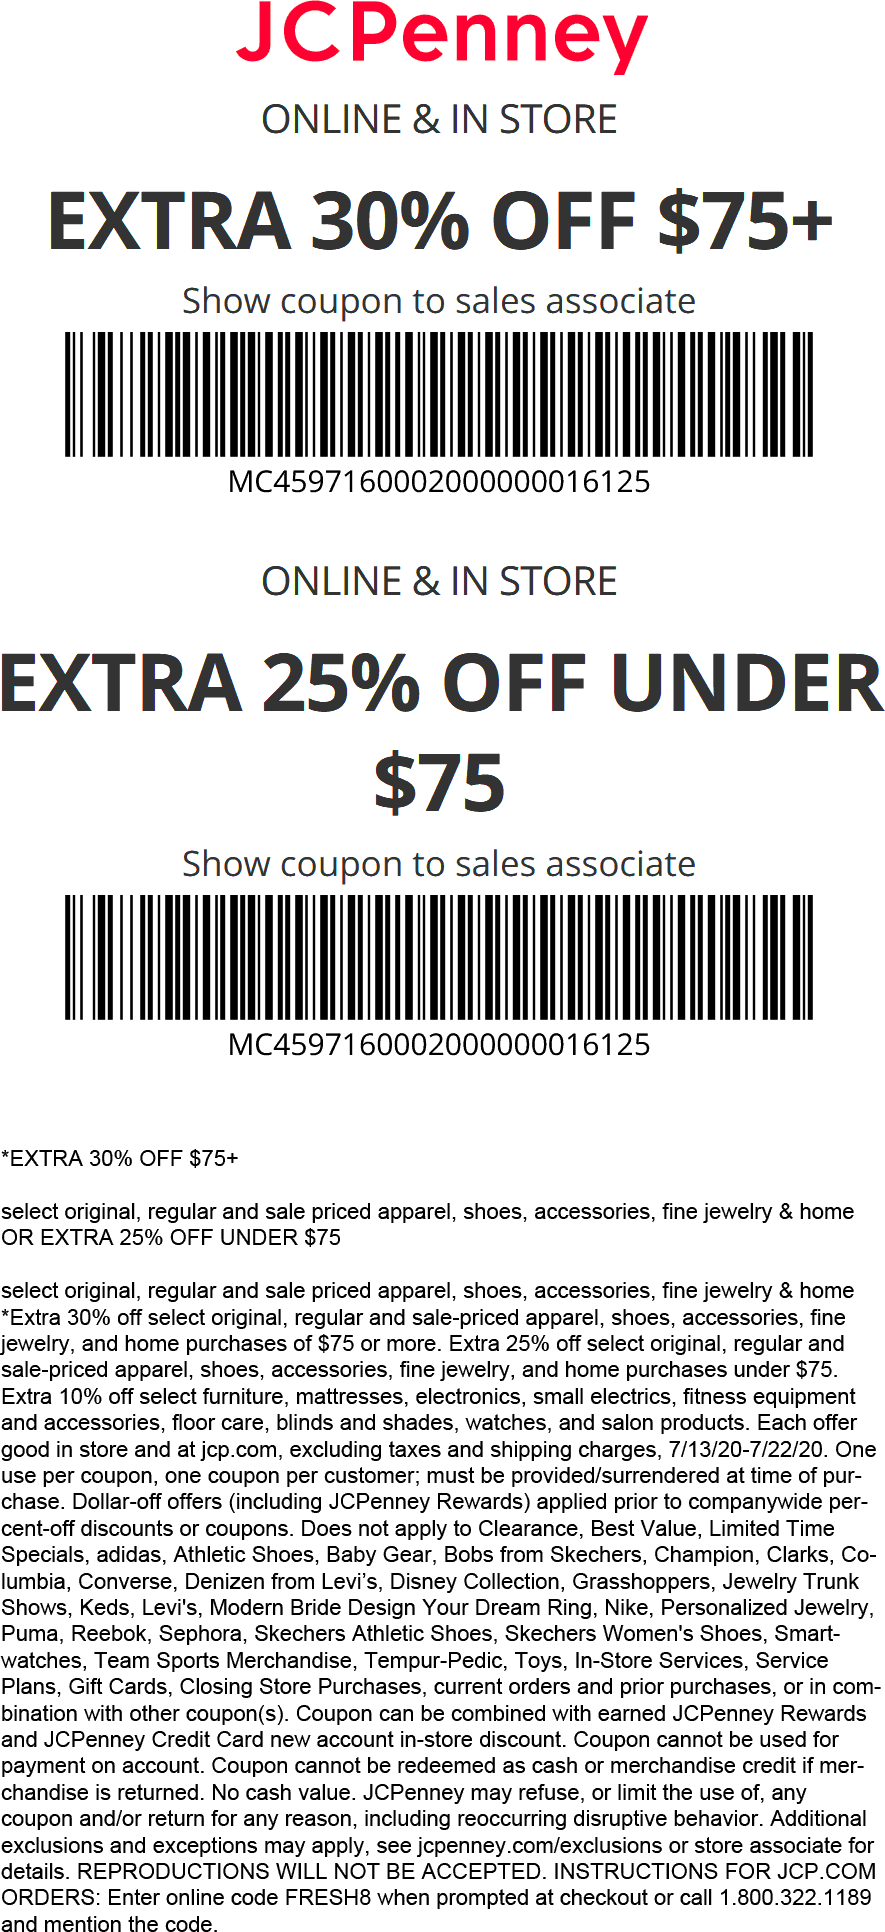 JCPenney stores Coupon  Extra 25-30% off at JCPenney, or online via promo code FRESH8 #jcpenney ootd fashion fashionista jcp affordablefashion affordablestyle jcpsalon style jcpenneysalon fashionblogger salonbyinstyle 